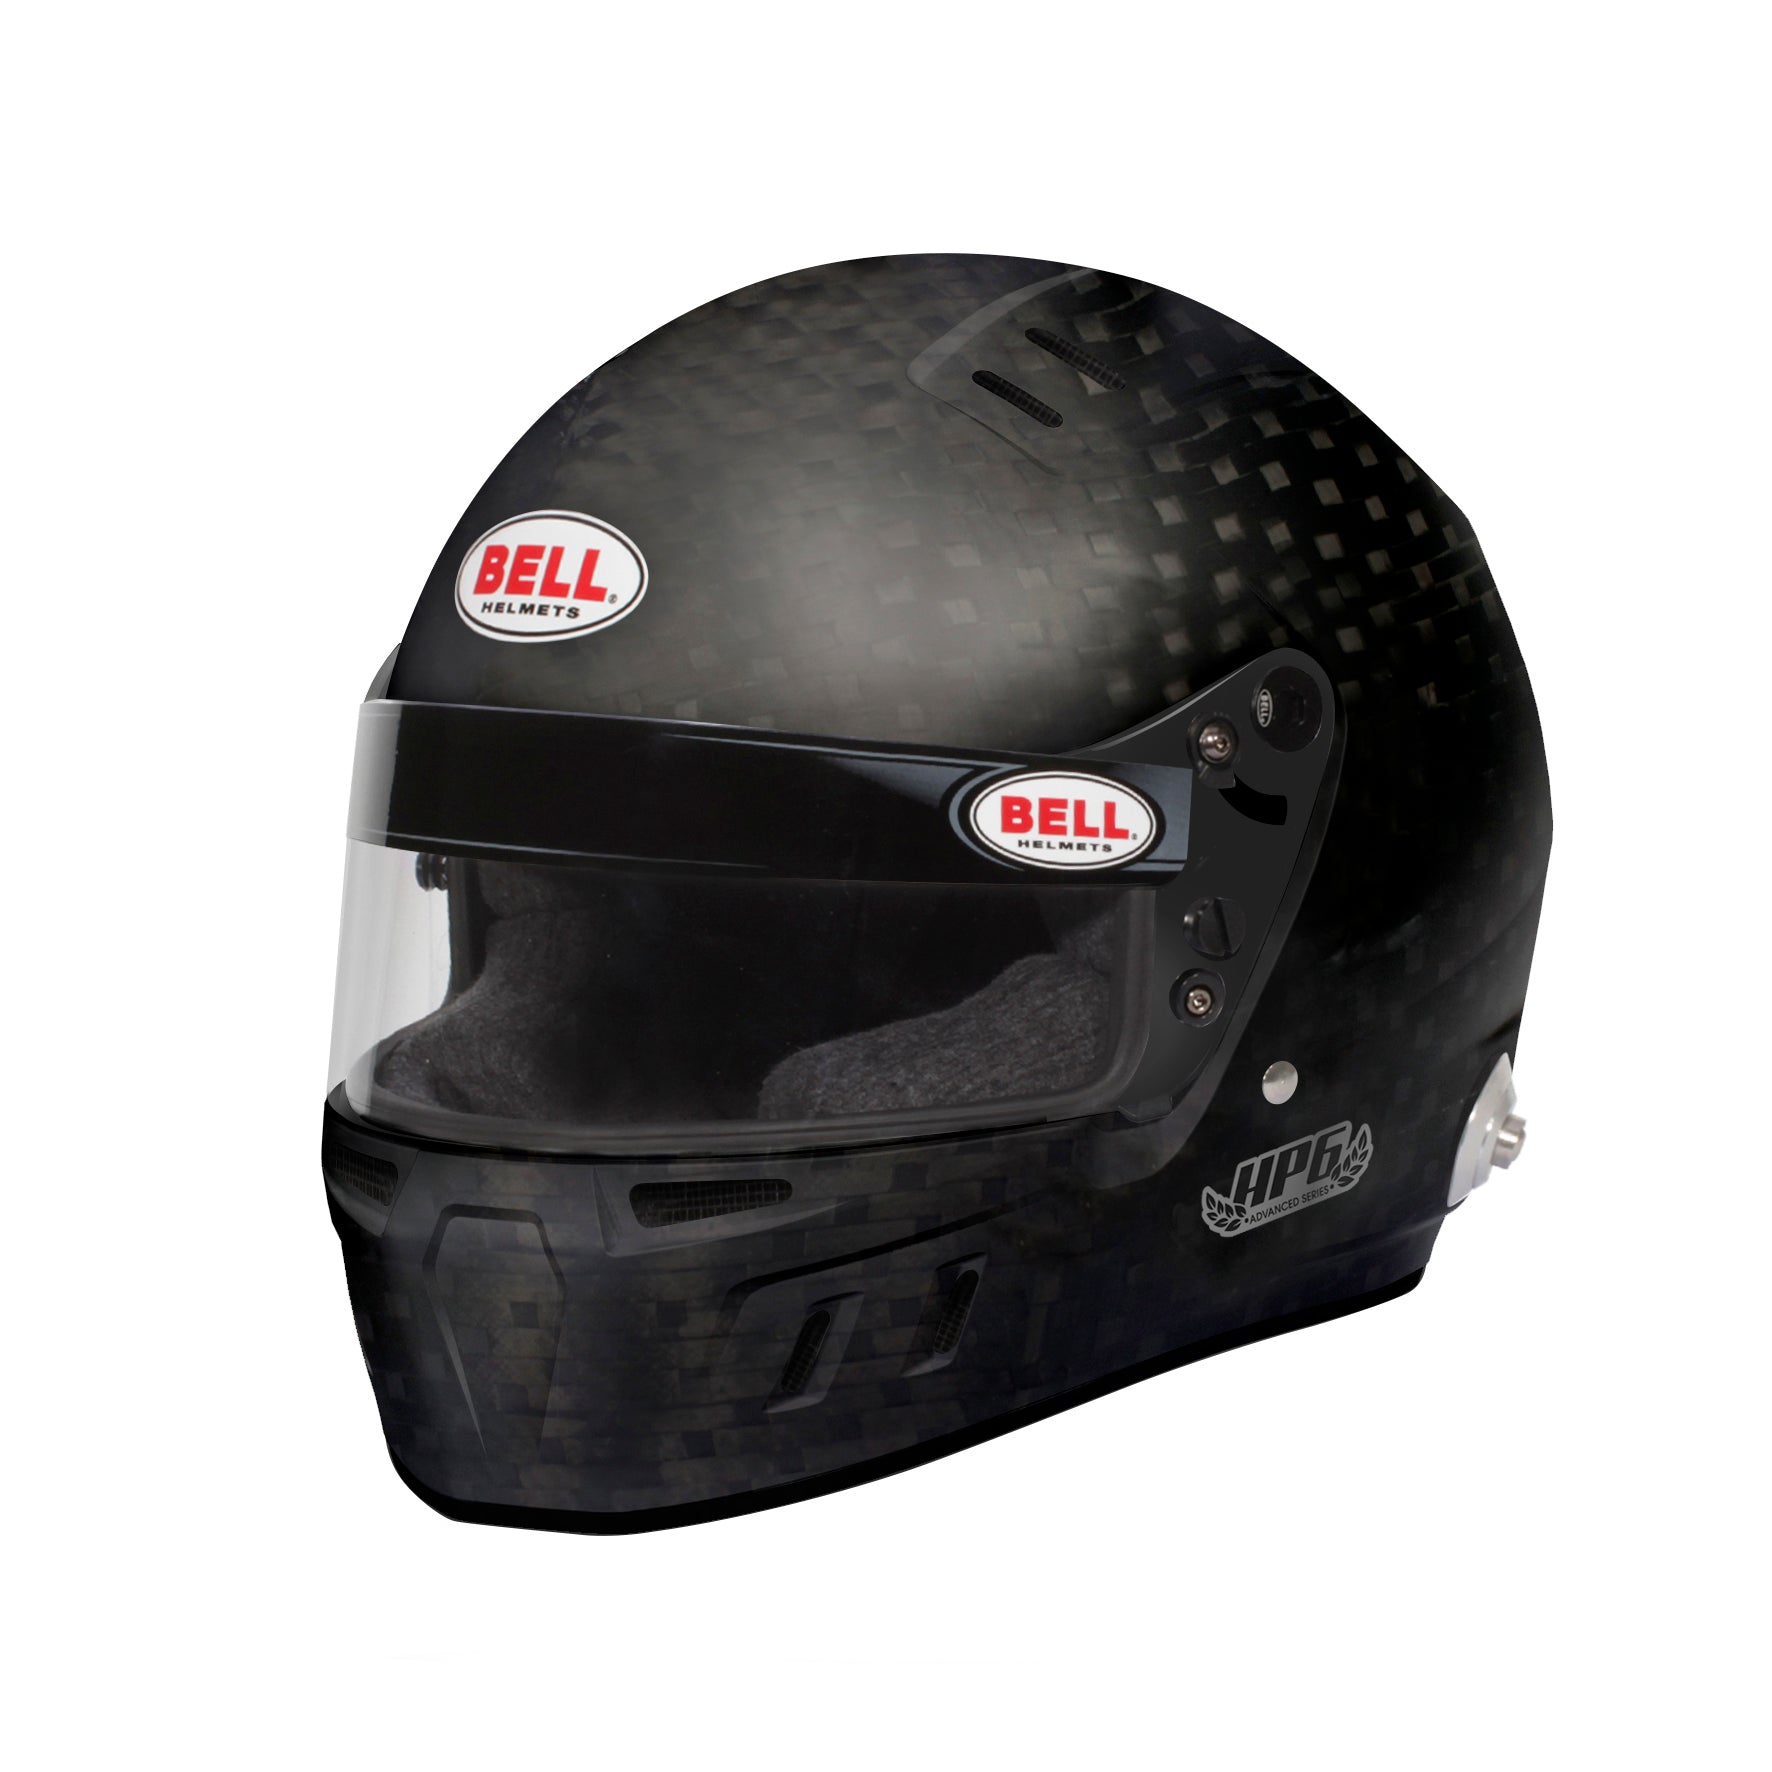 BELL 1140007 HP6 Racing helmet full-face, HANS, FIA8860-2018, carbon, size 60 (7 1/2) Photo-0 